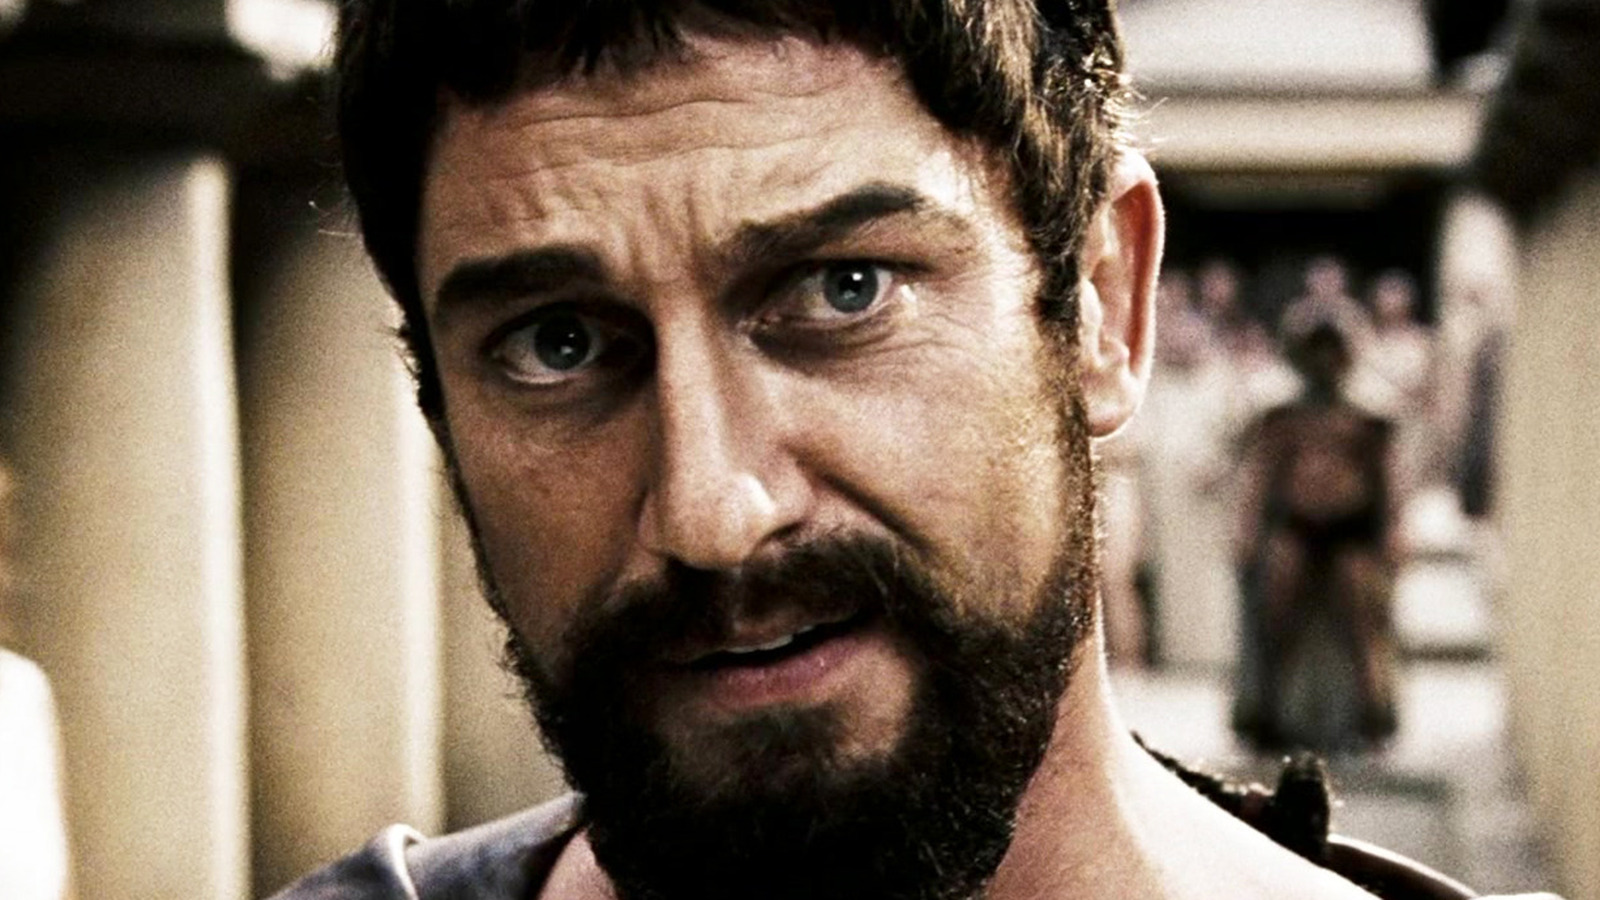 The true story of 300: how much of the Gerard Butler movie is real?